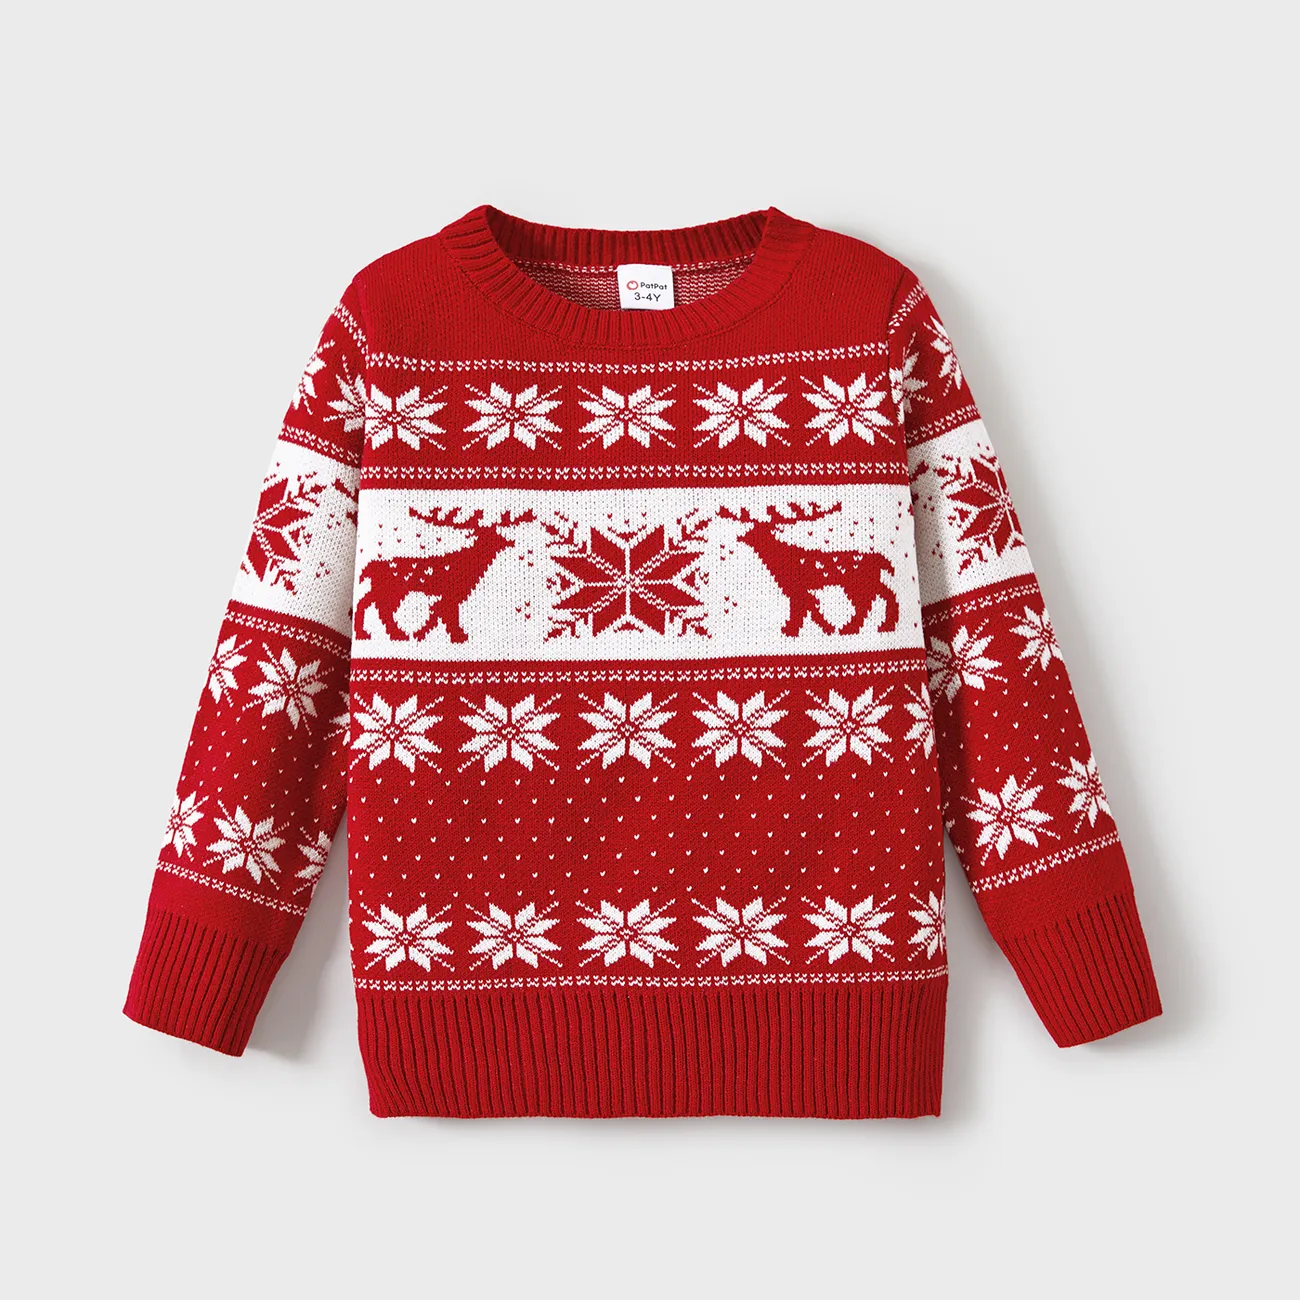 Christmas Family Matching Deer and Snowflake Graphic Long-sleeve Knitted Sweater  big image 1